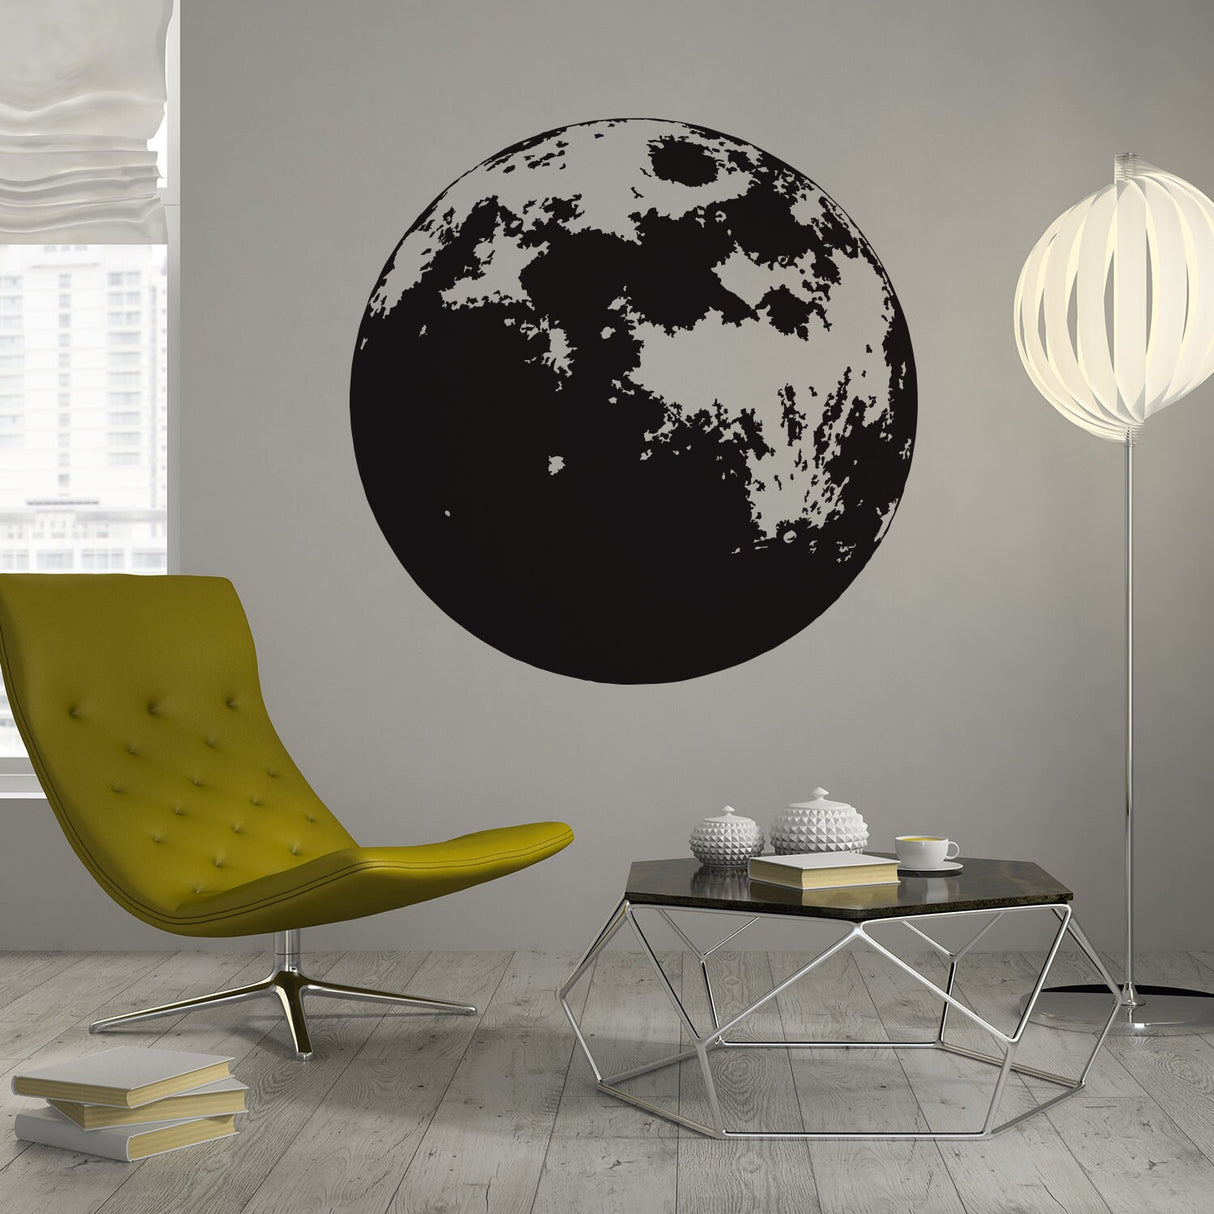 Moon Phase Wall Decor Decal - Kid Full Large Sticker For Nursery Baby Kids Room